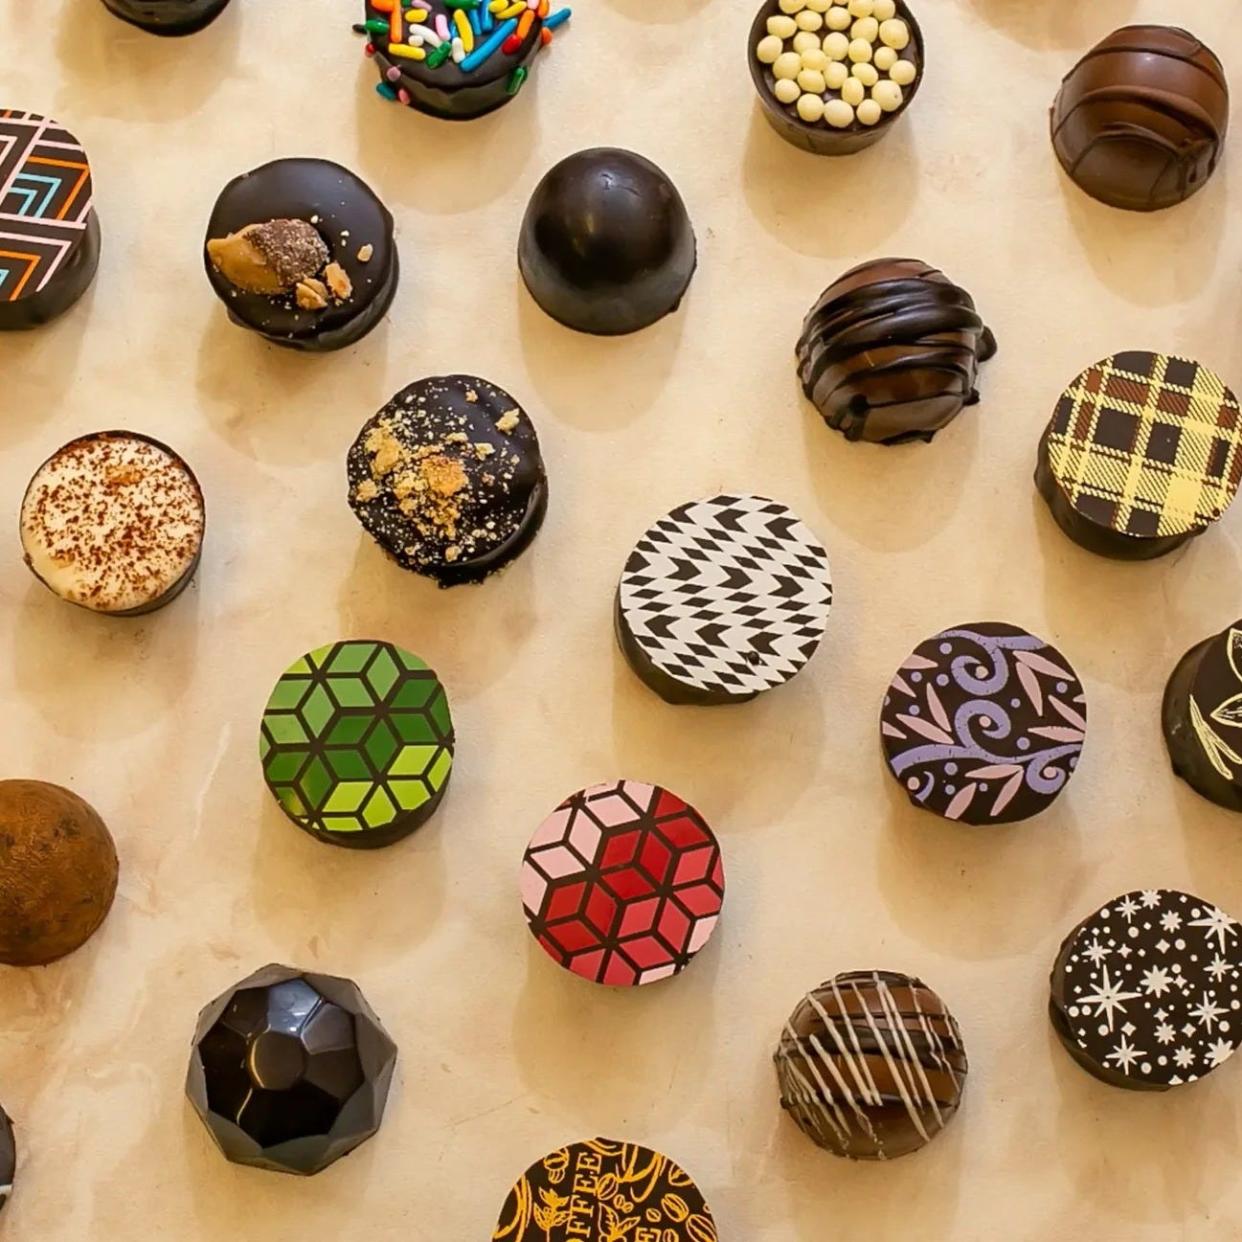 Pure Imagination Chocolatier sells a variety of chocolate truffles, as well as other confections. It opened a second location in December at Polaris Fashion Place.